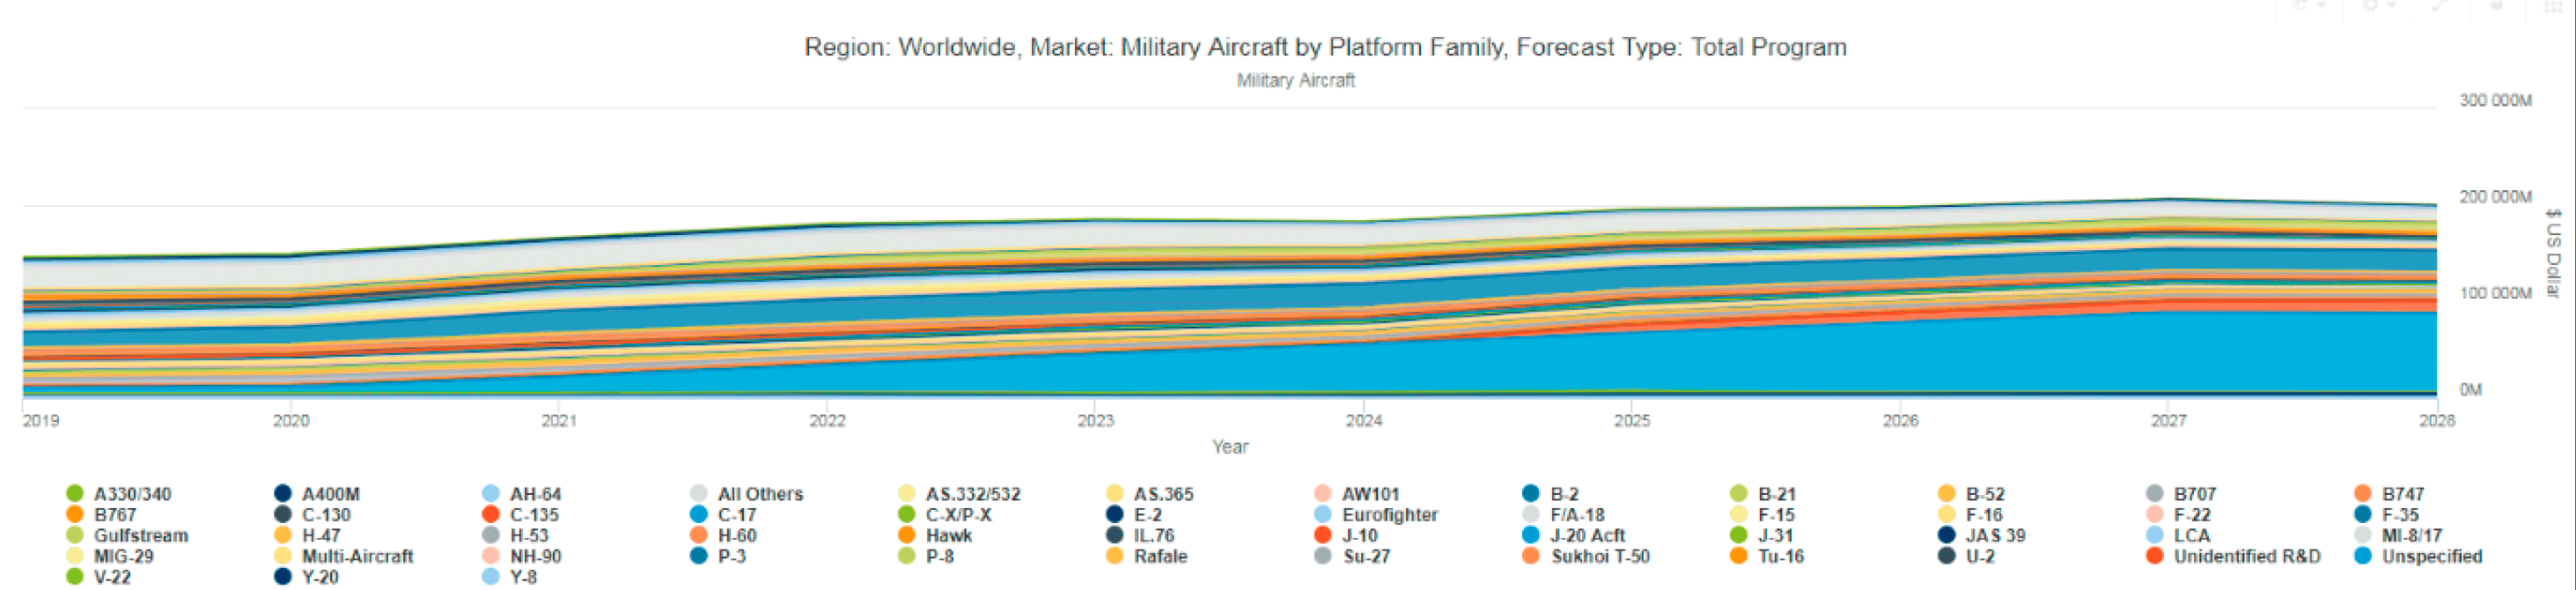 image of market forecast military aircraft